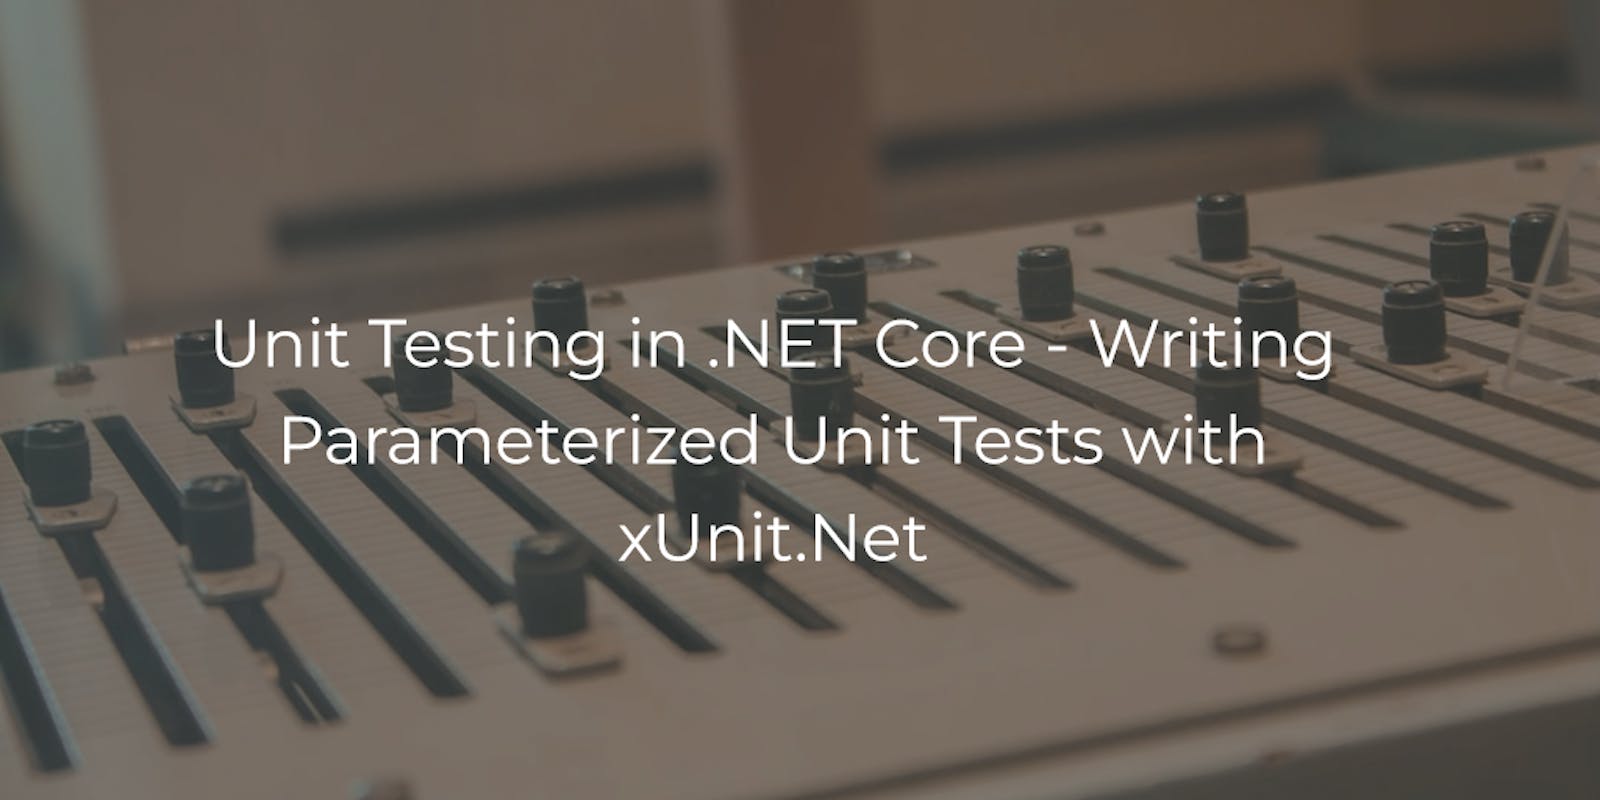 Unit Testing in .NET Core - Writing Parameterized Unit Tests with xUnit.net